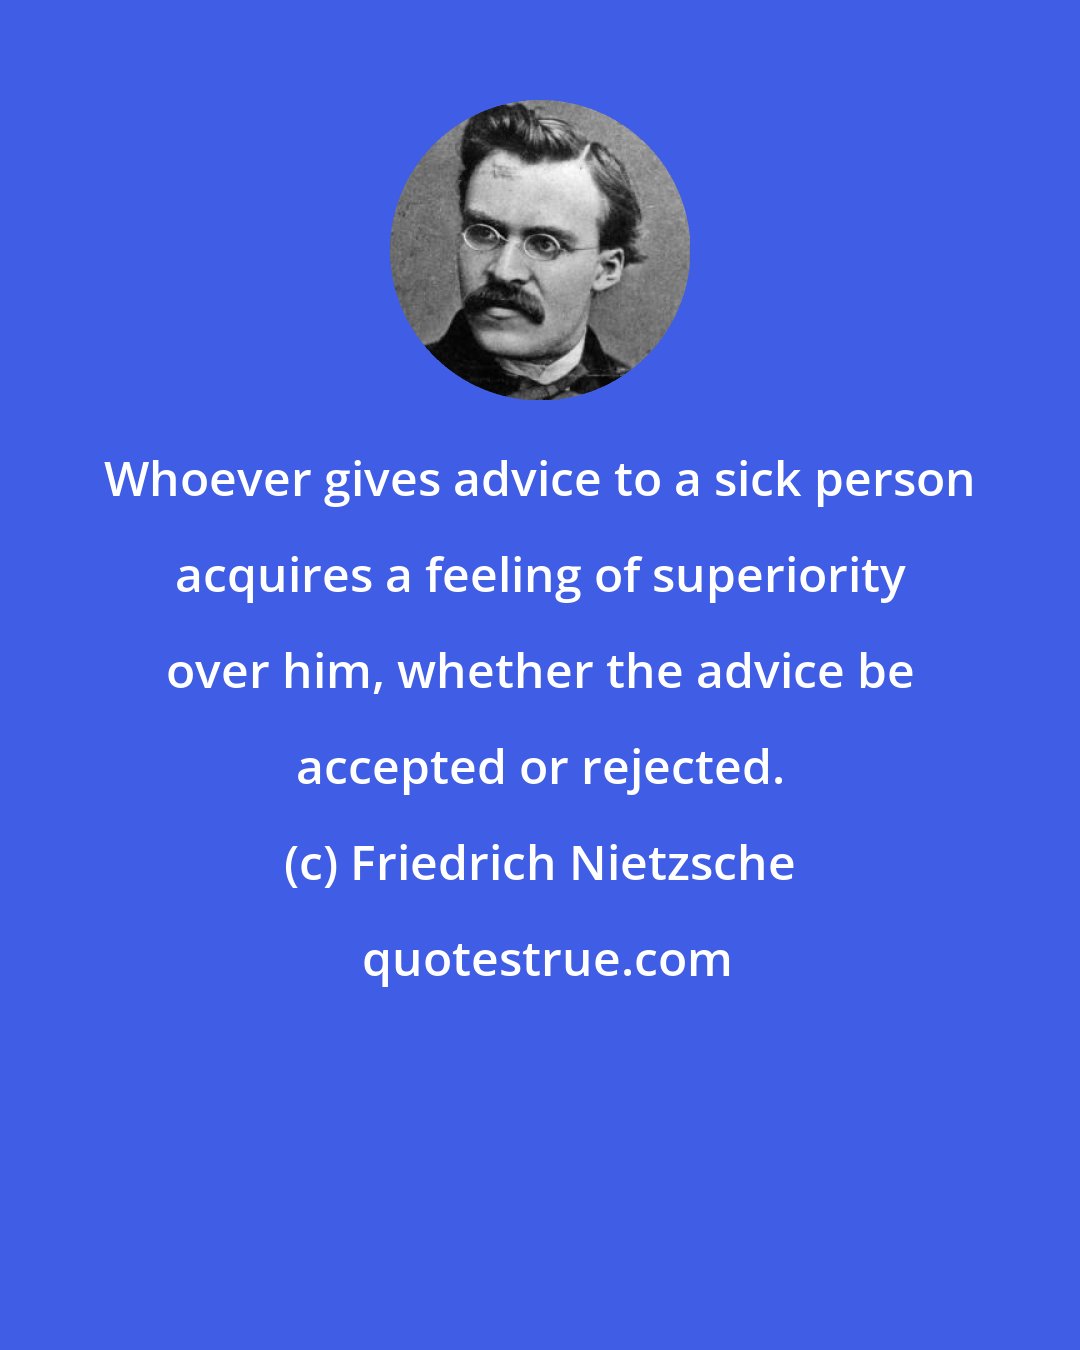 Friedrich Nietzsche: Whoever gives advice to a sick person acquires a feeling of superiority over him, whether the advice be accepted or rejected.